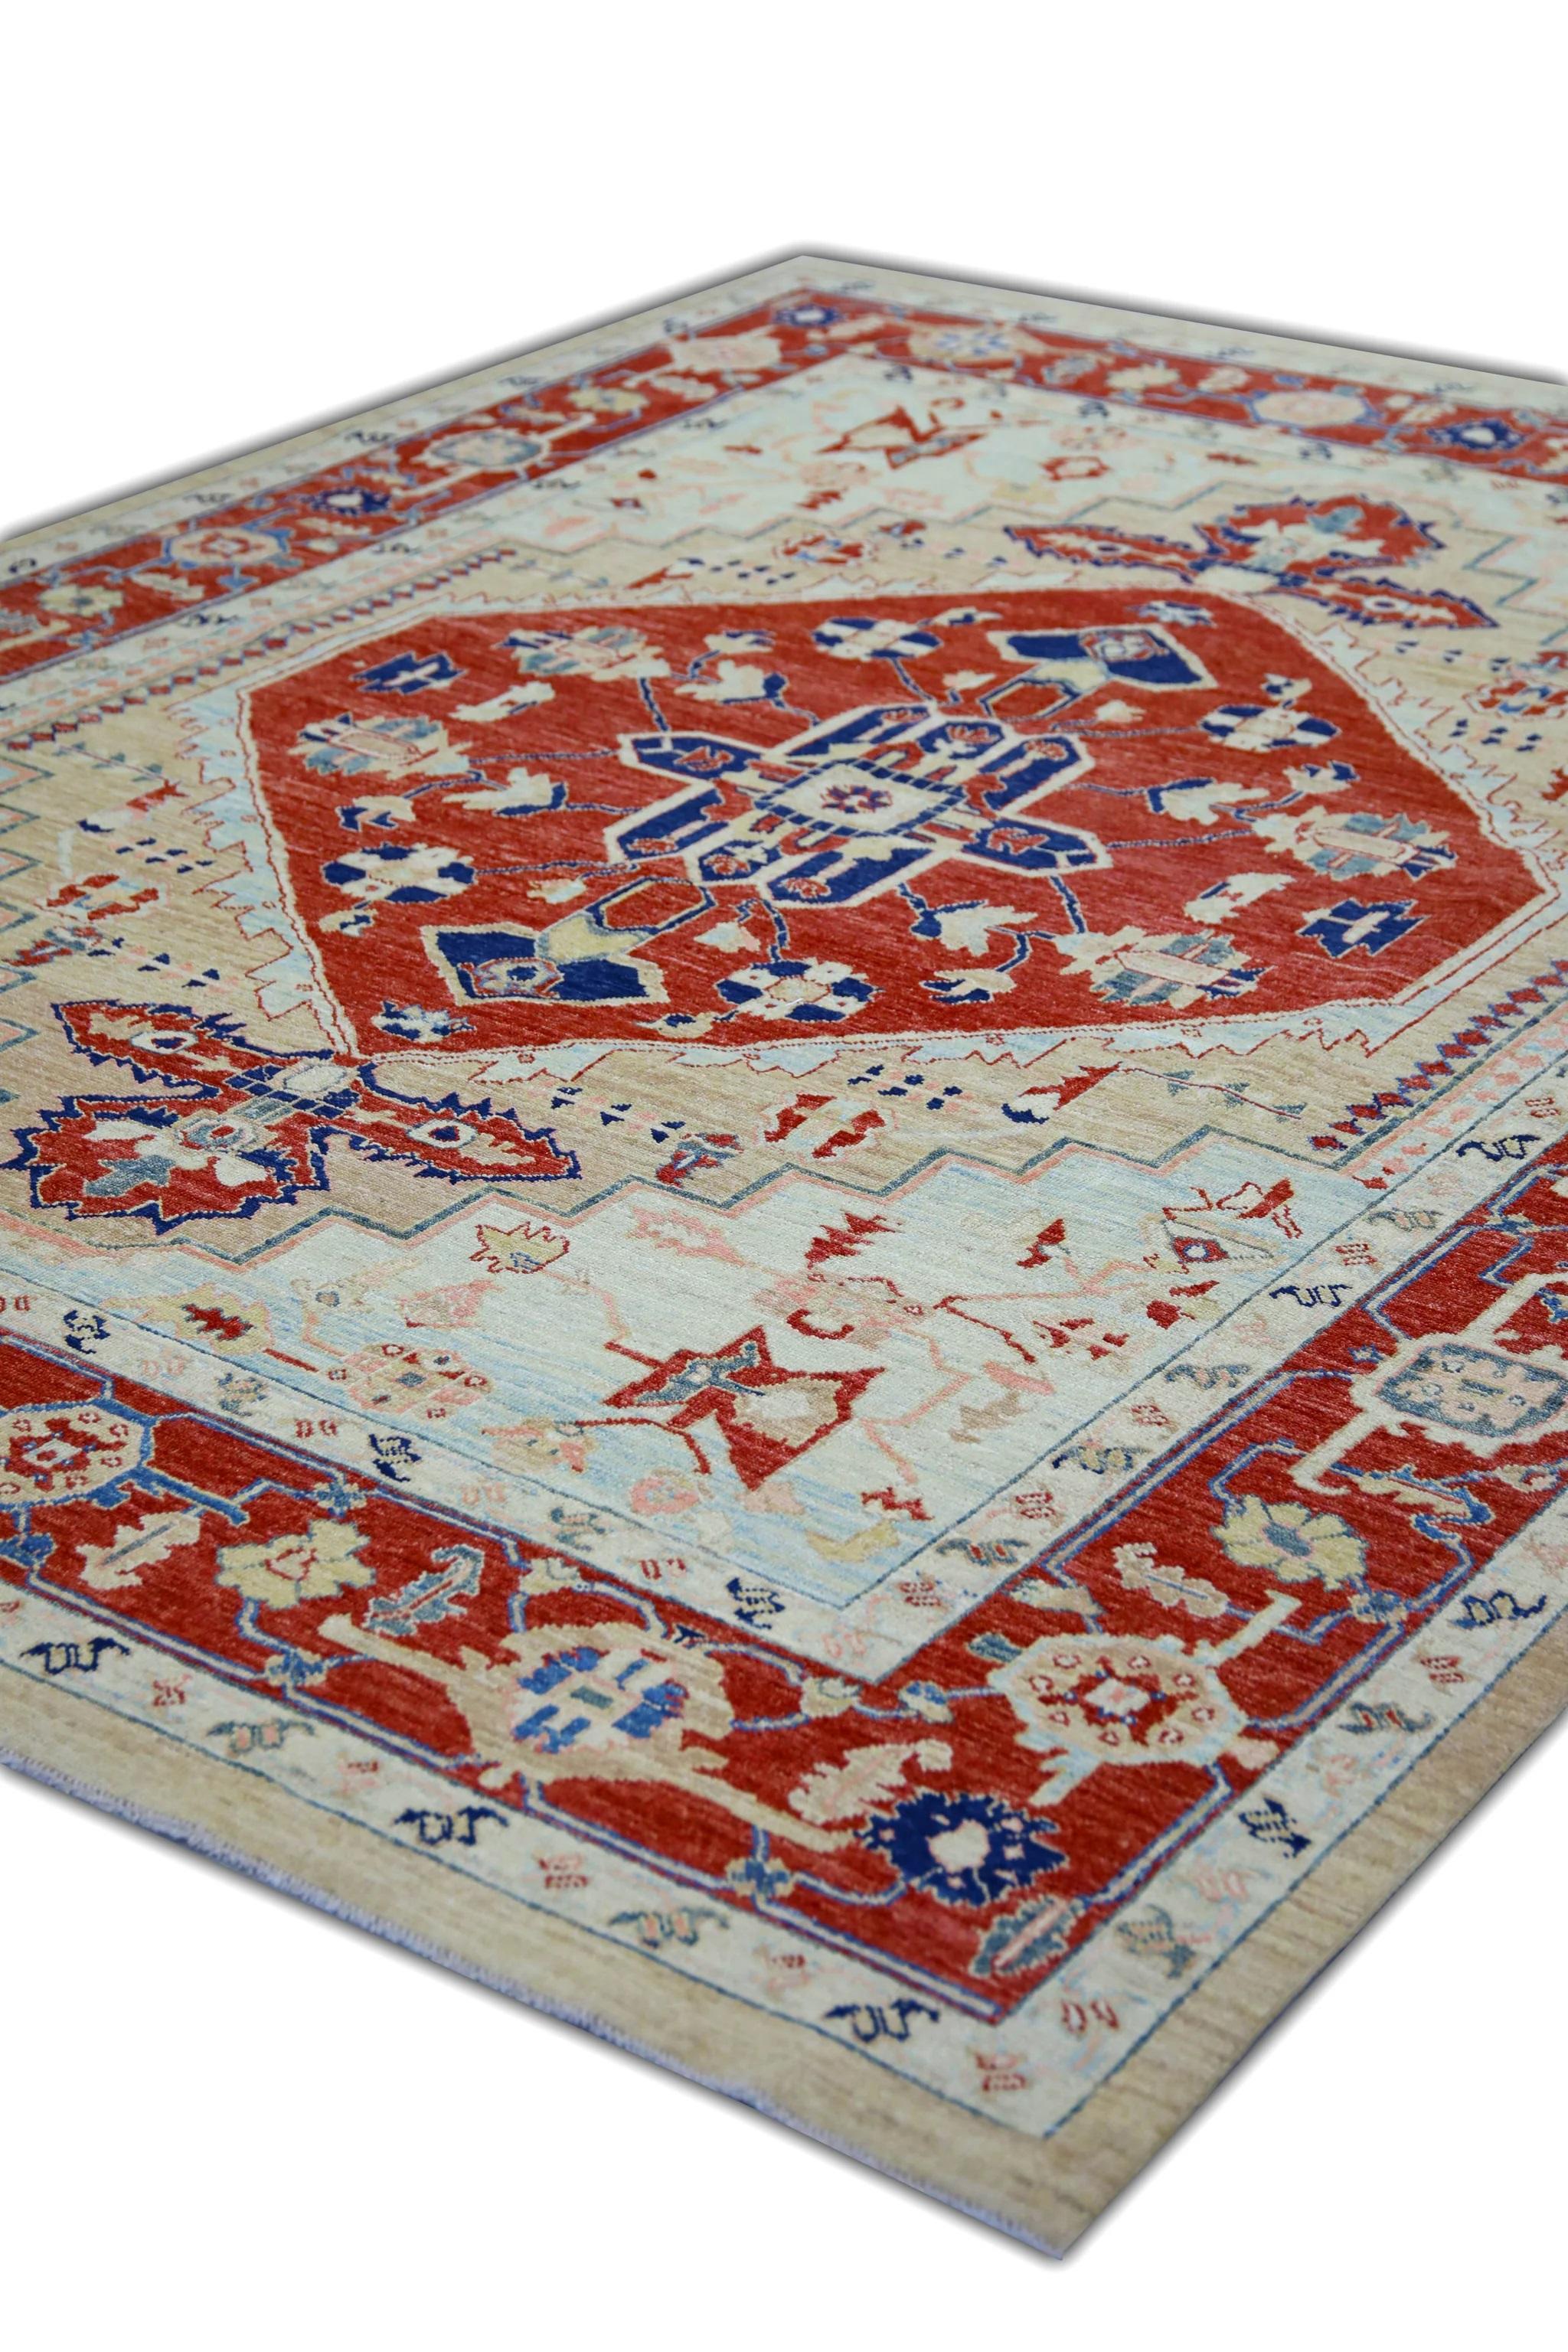 Contemporary Floral Turkish Finewoven Wool Oushak Rug in Bright Red and Blue 7'10